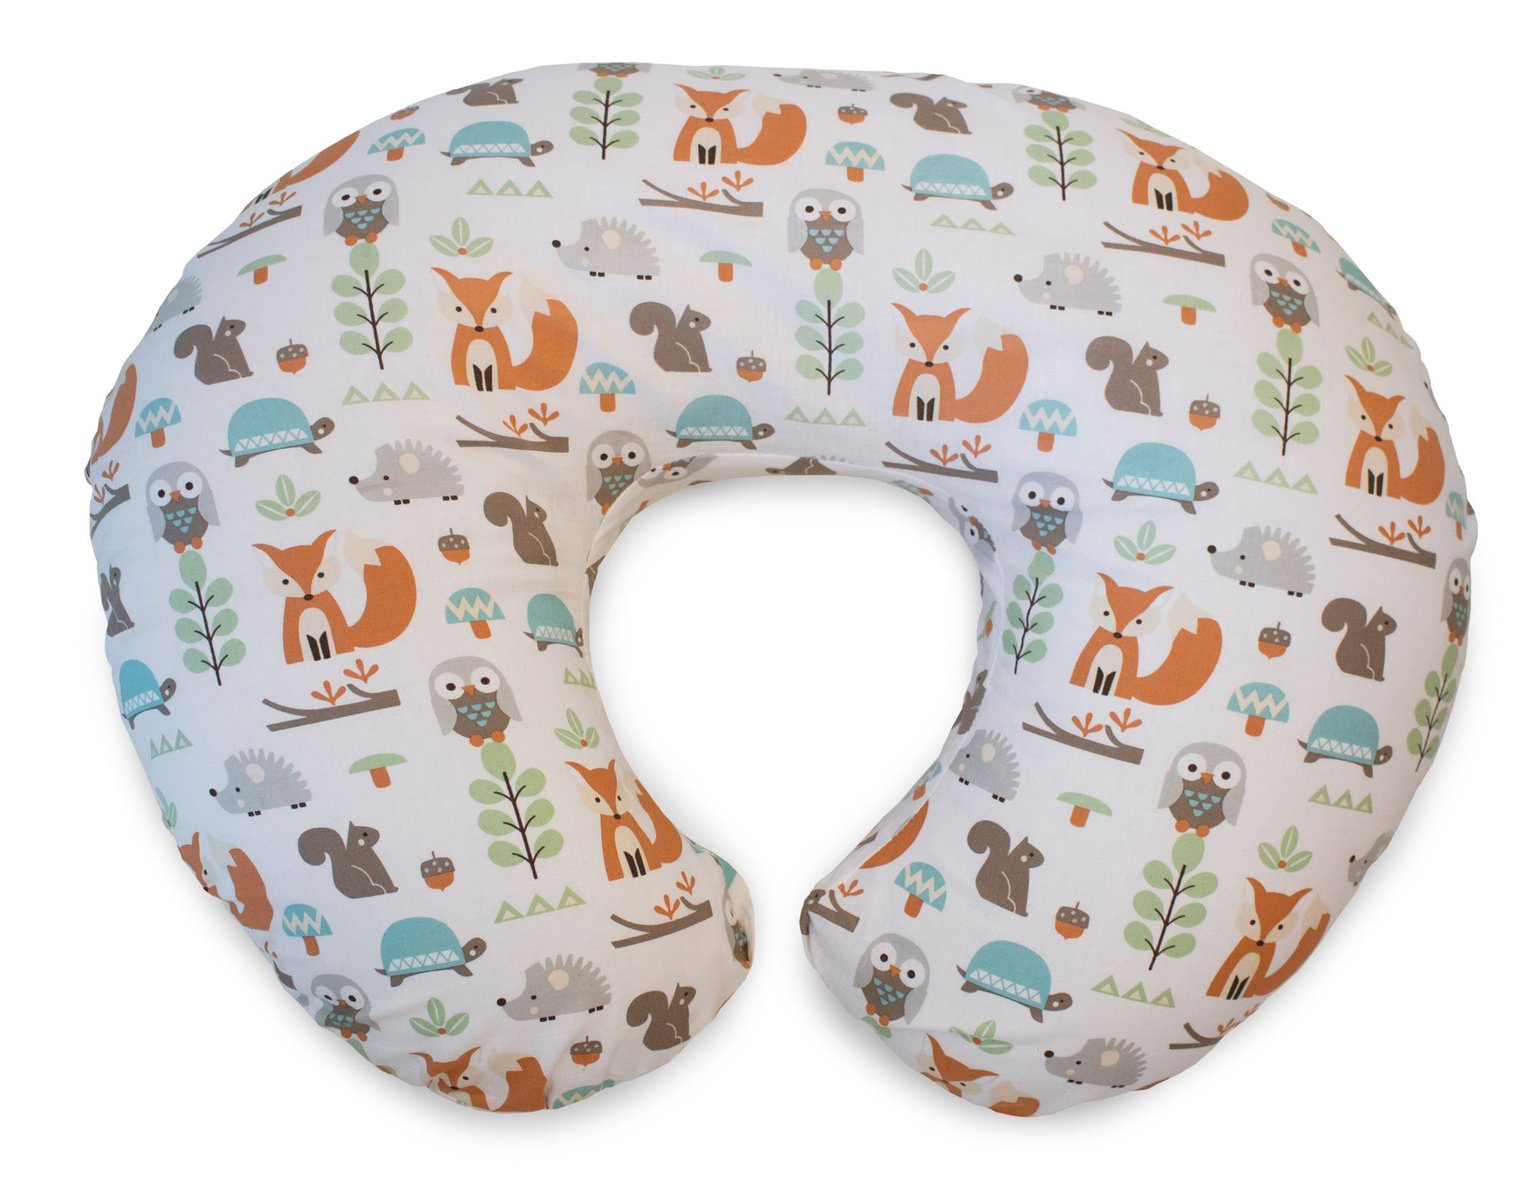 Buy Chicco Boppy Pregnancy and Baby 